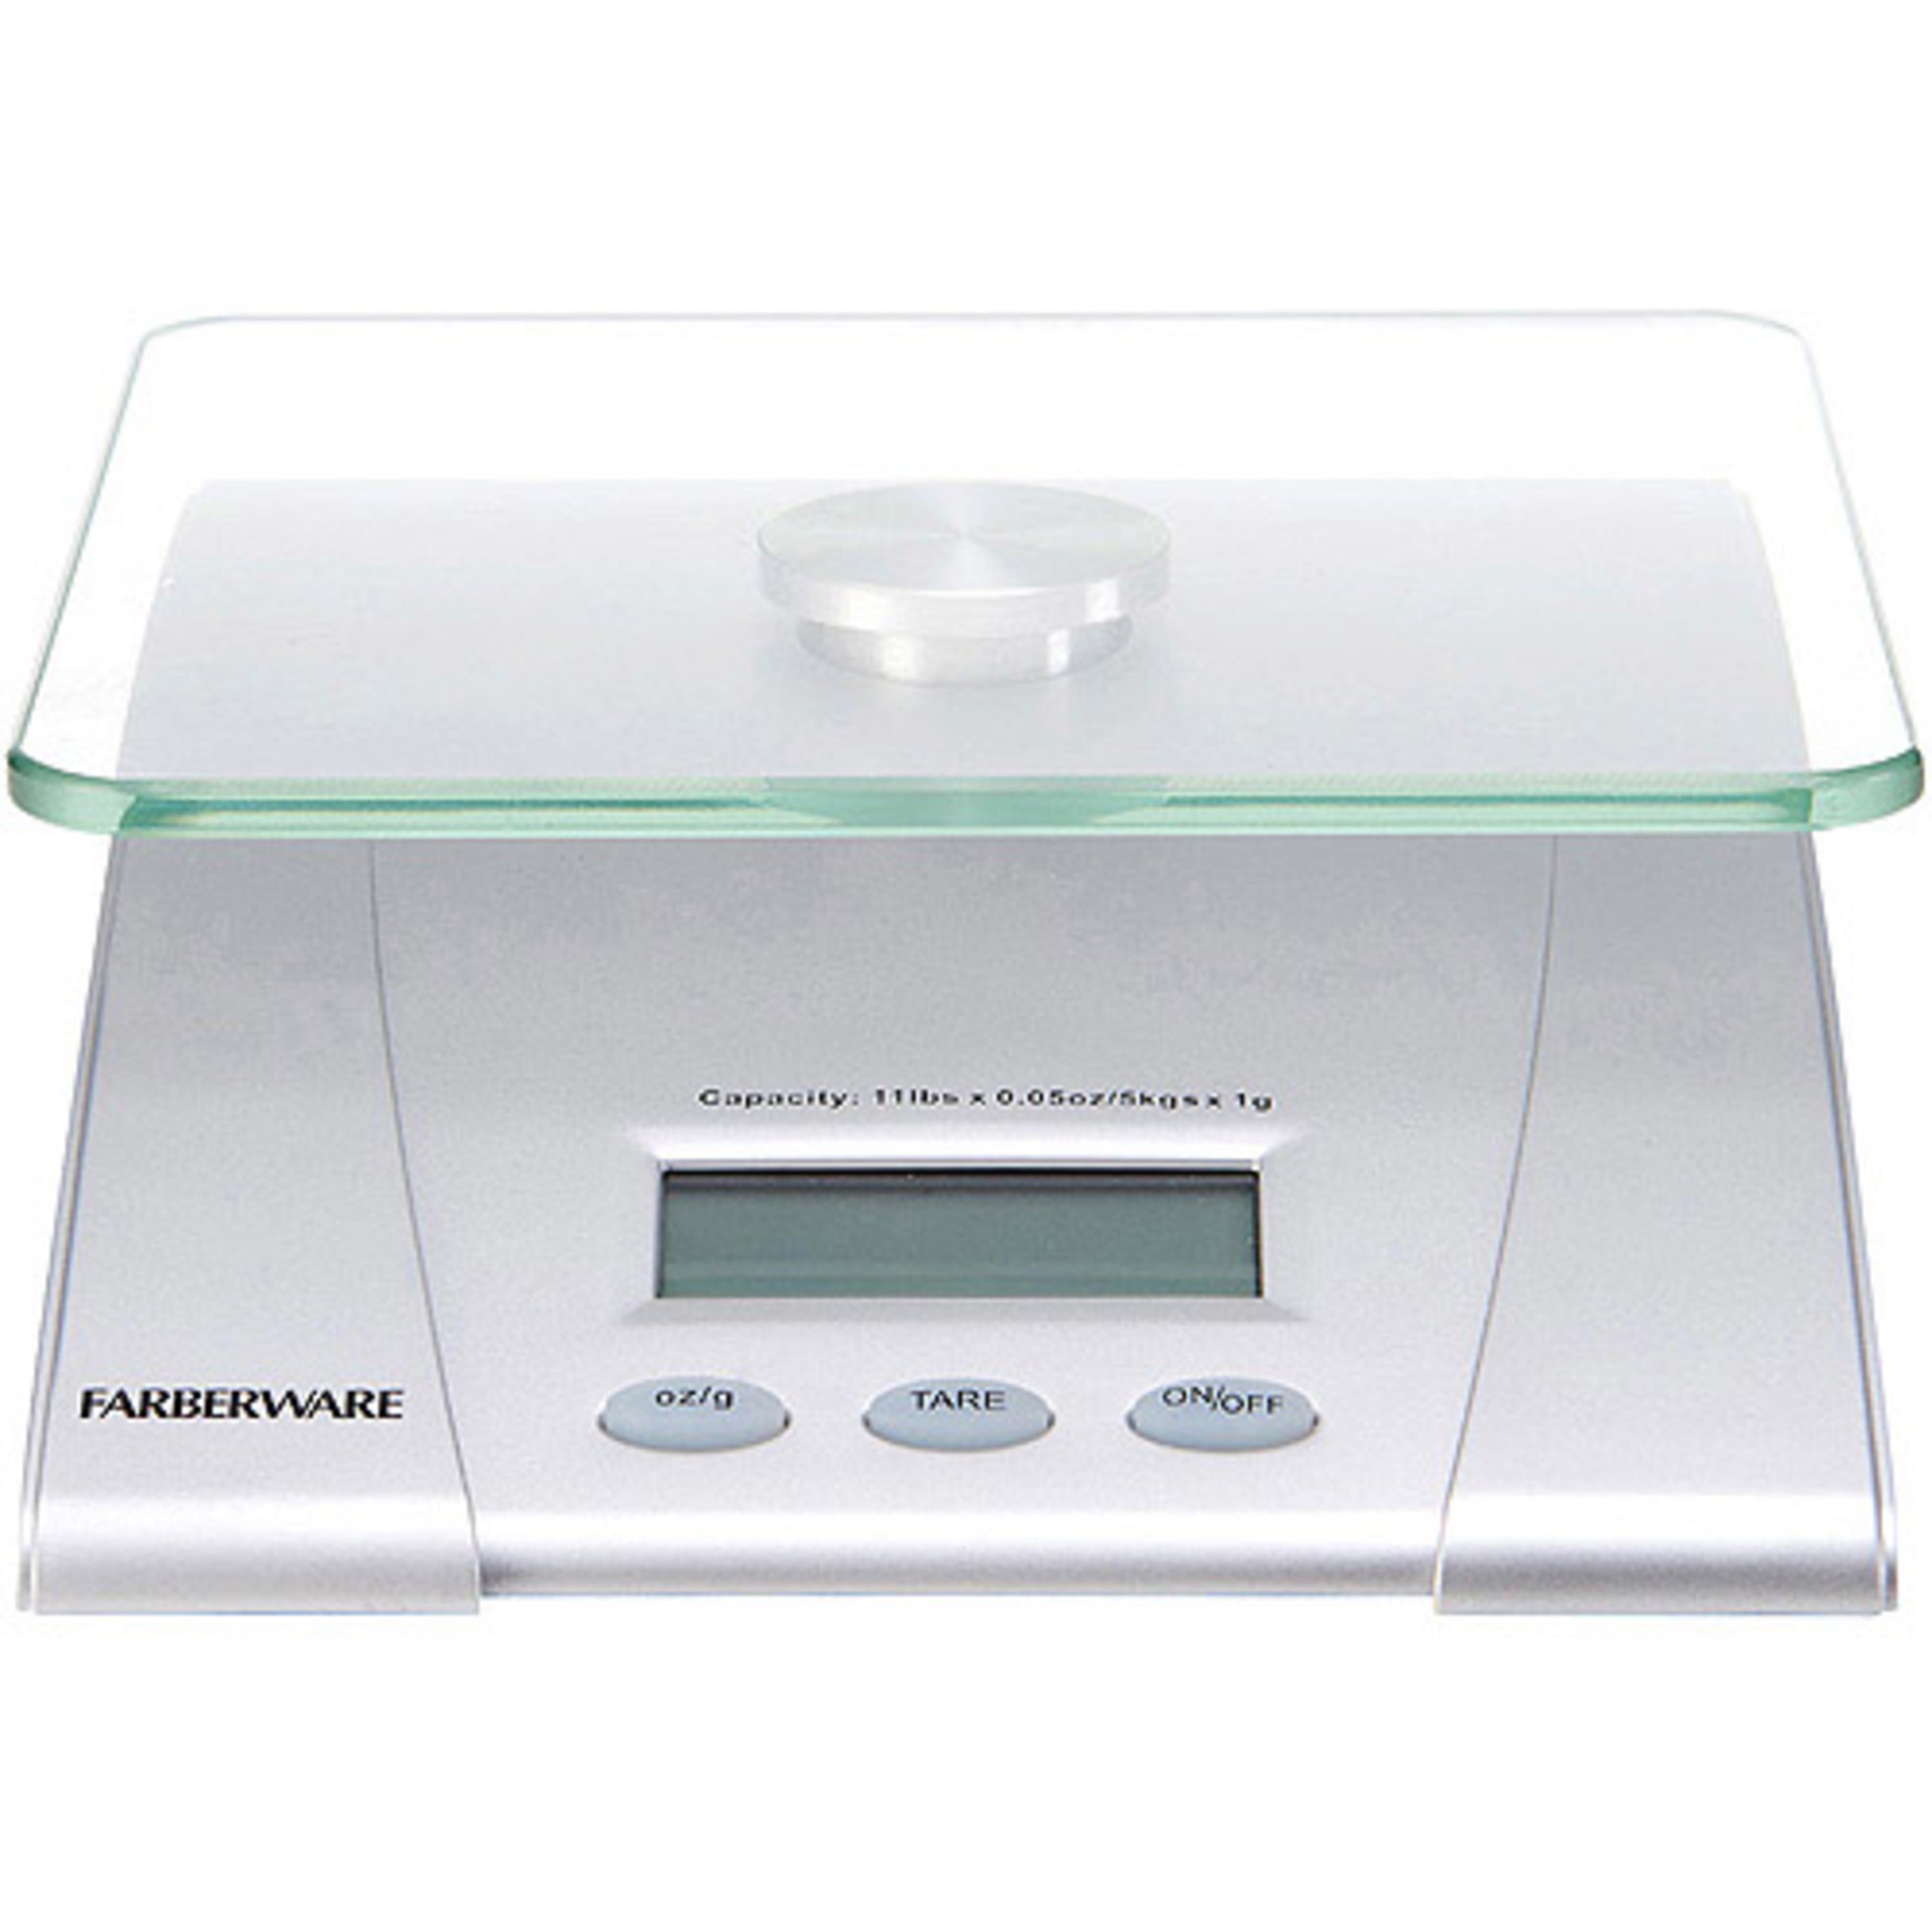 Farberware Professional Electronic Glass Kitchen and Food Scale, 11-Pound,  SILVER - 5083276